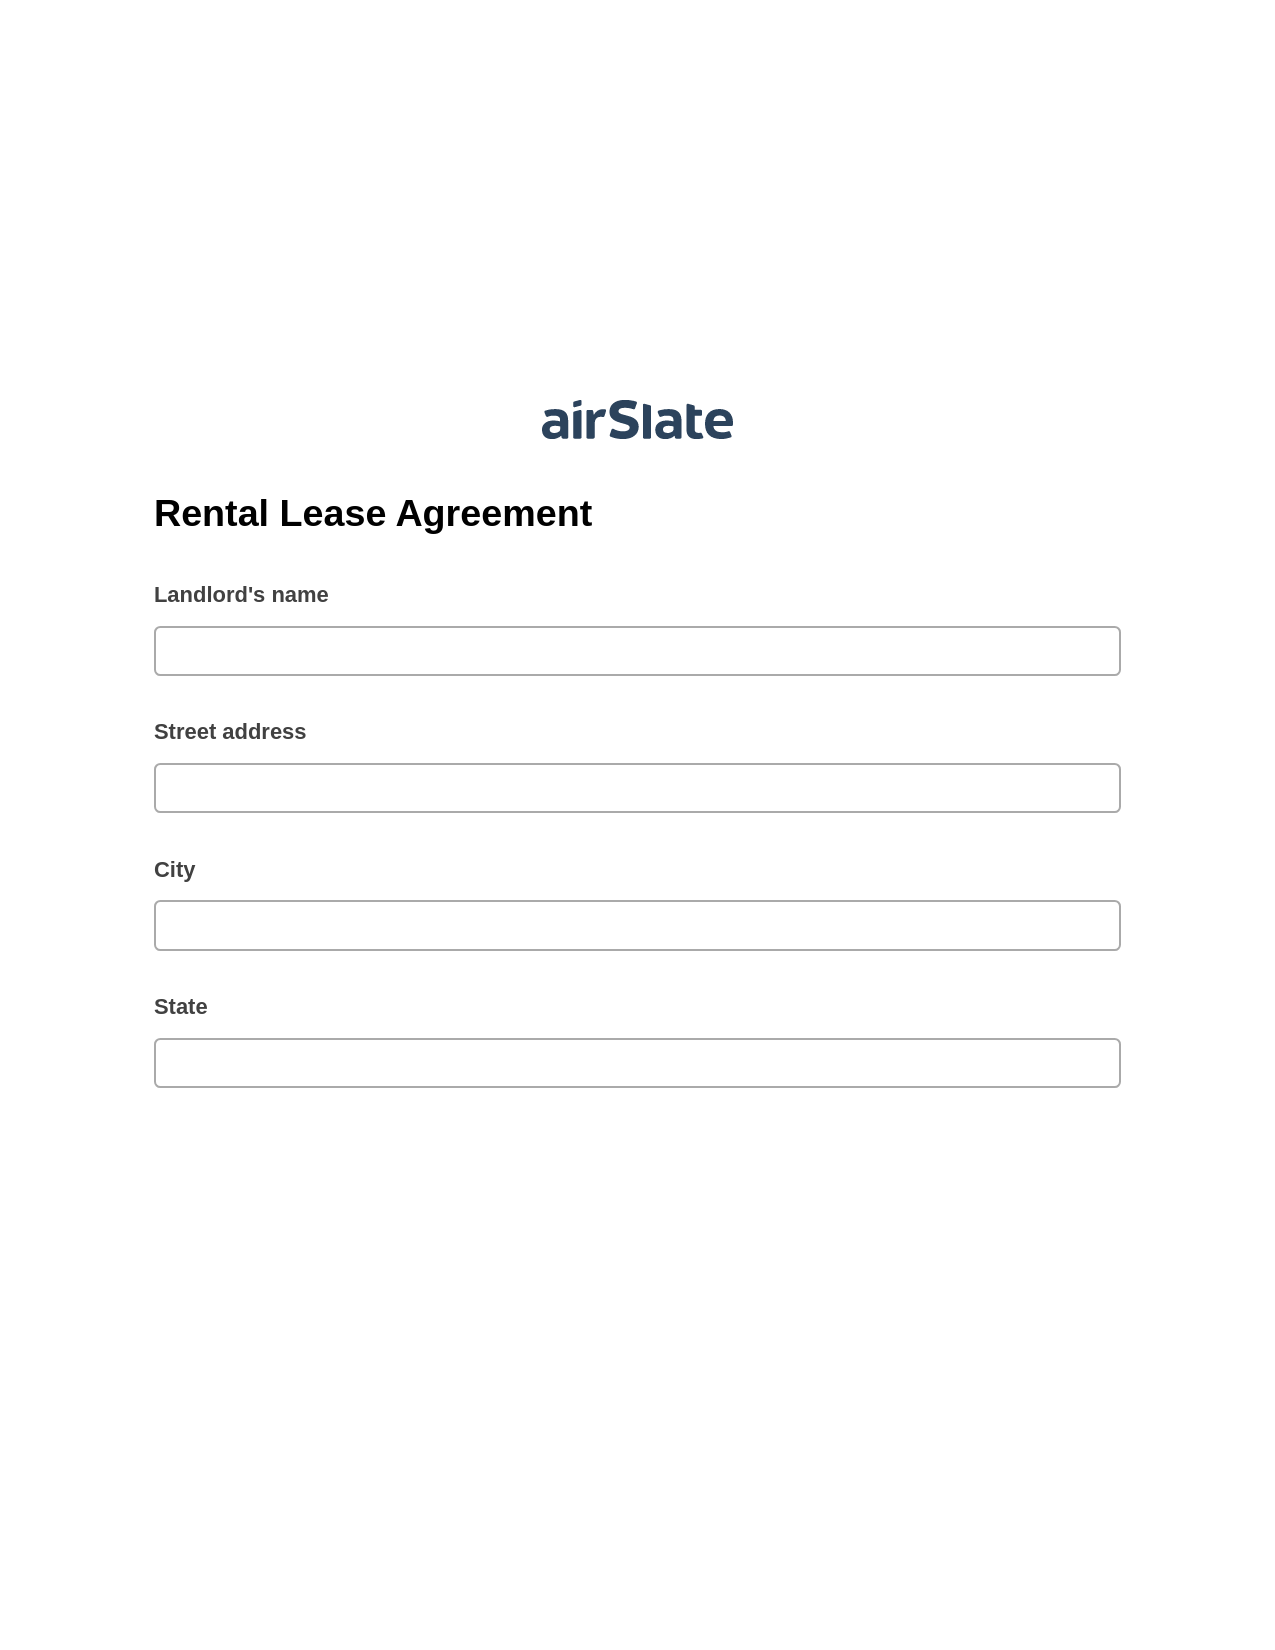 Multirole Rental Lease Agreement Pre-fill from CSV File Bot, Update Salesforce Record Bot, Archive to SharePoint Folder Bot